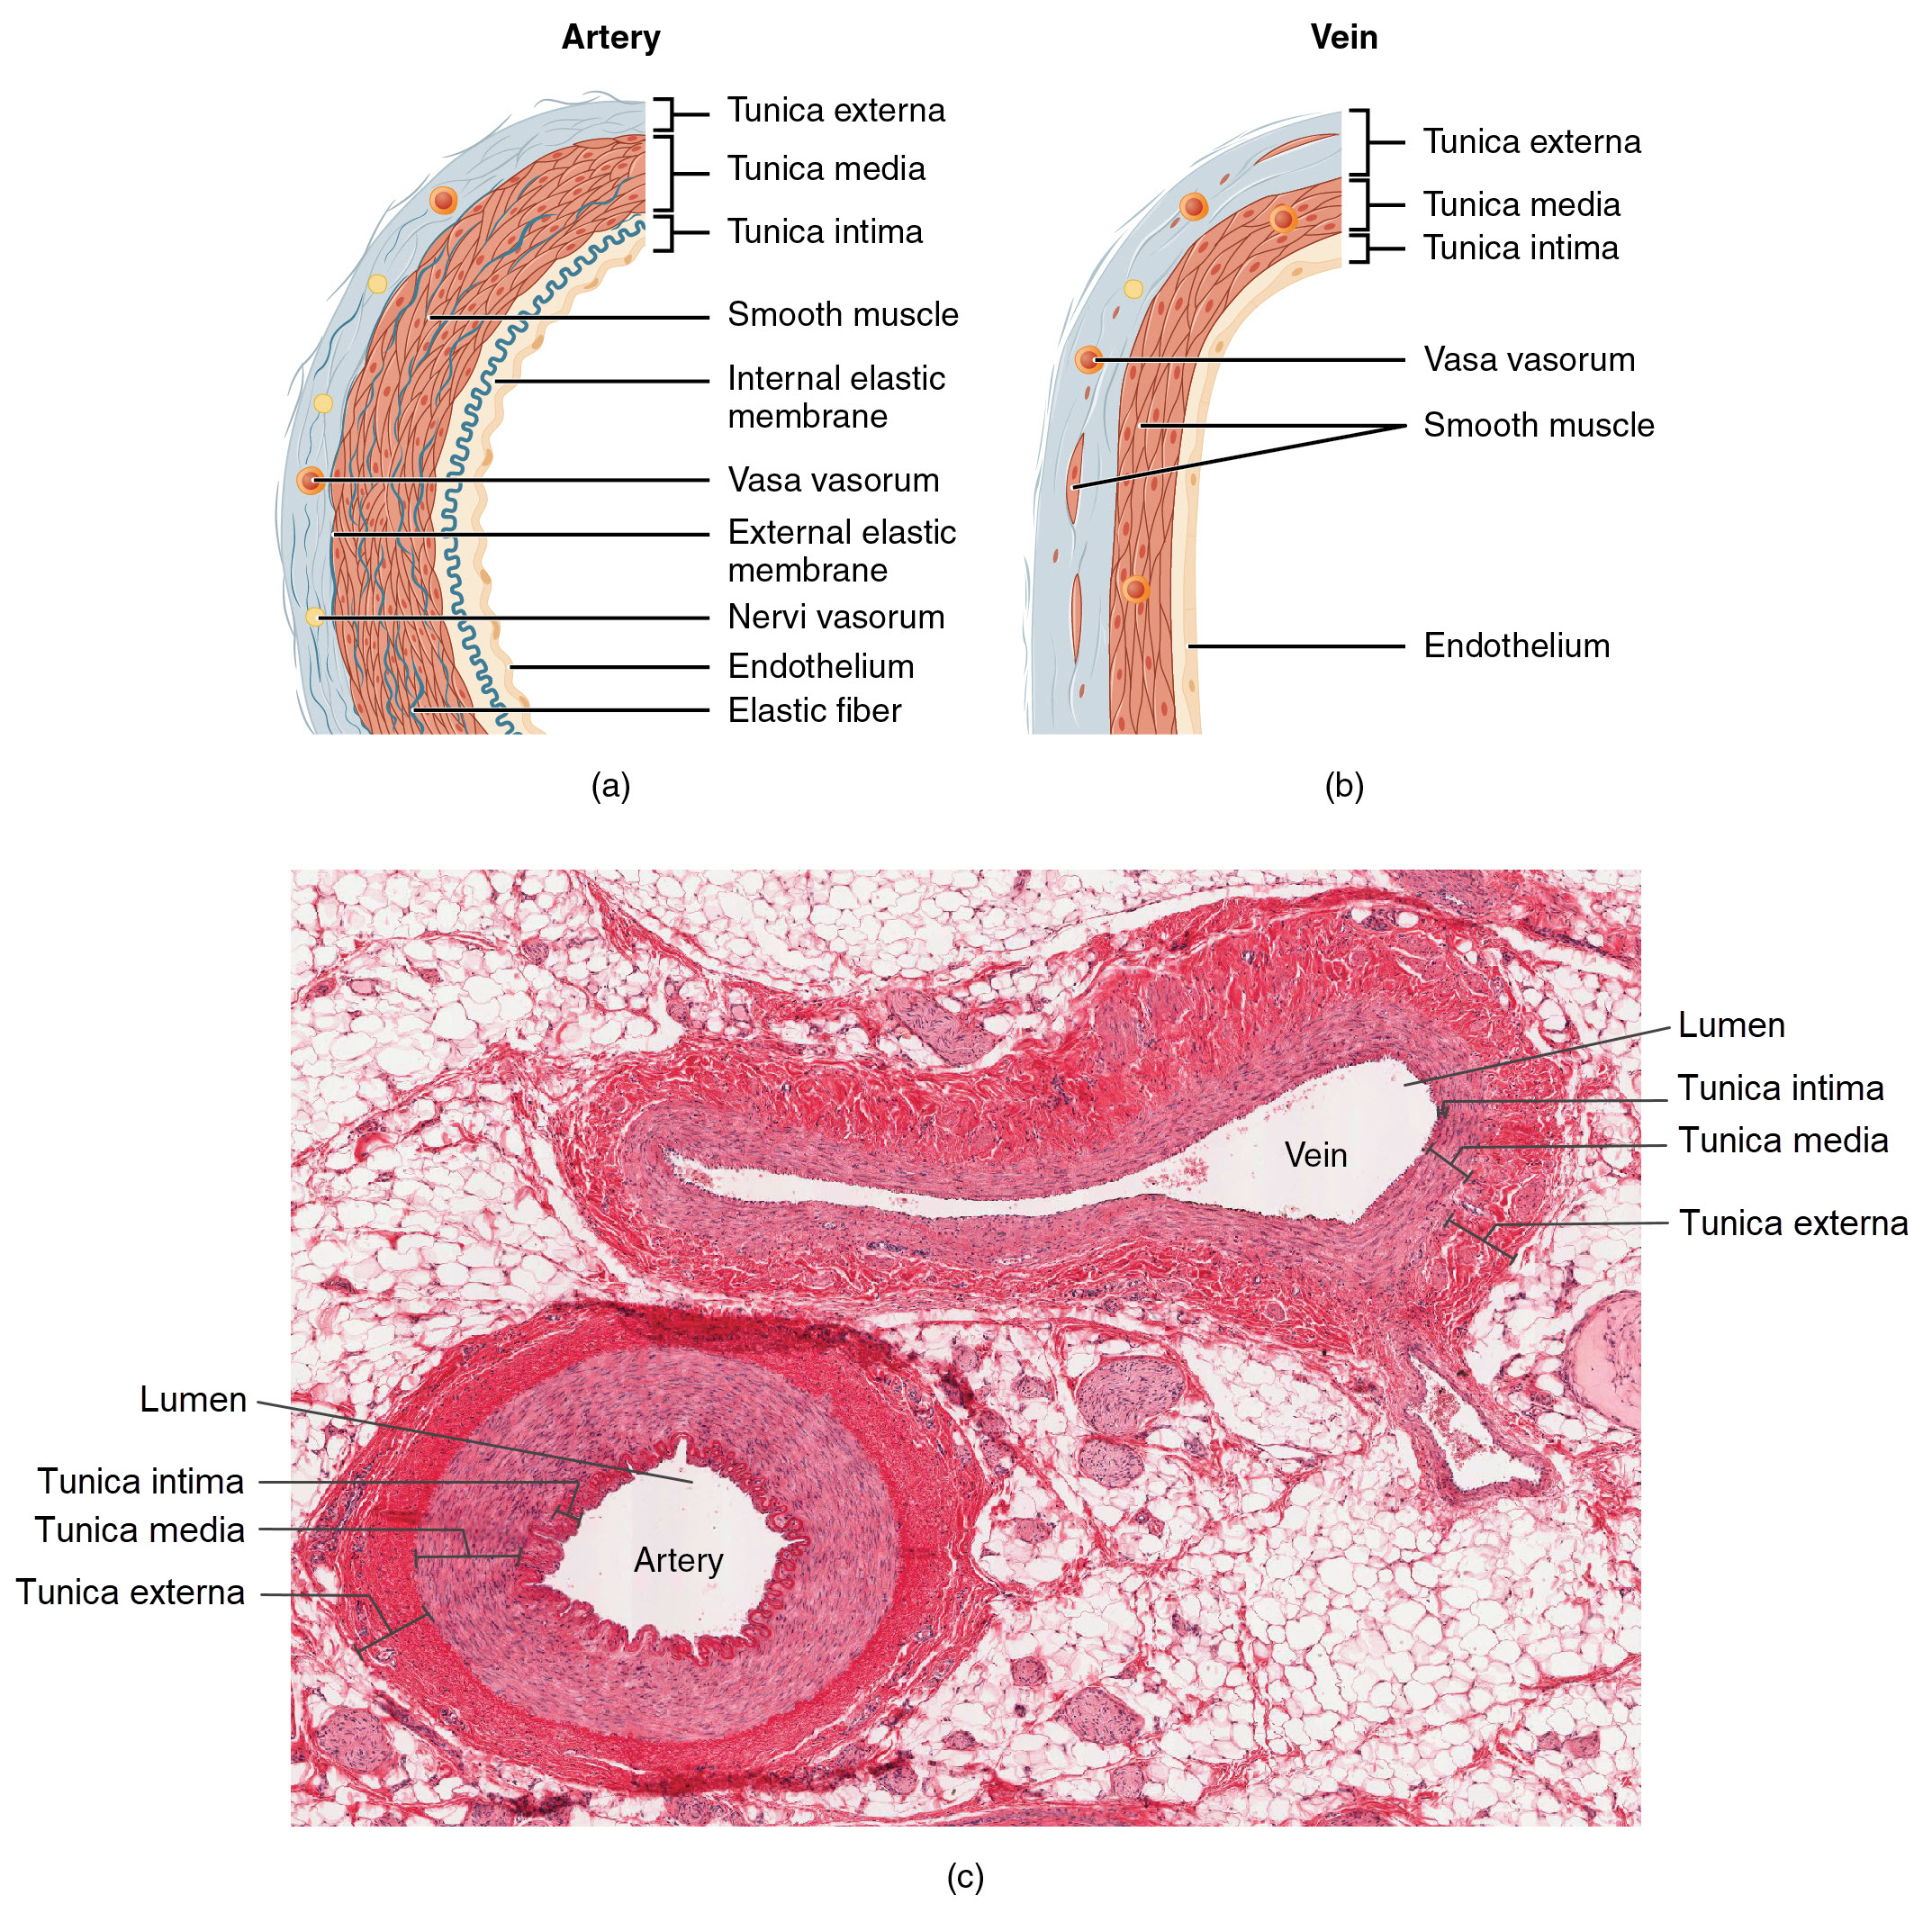 Structure and proportions of the three vessel tunics and lumen of arteries and veins are compared via diagram and micrograph.